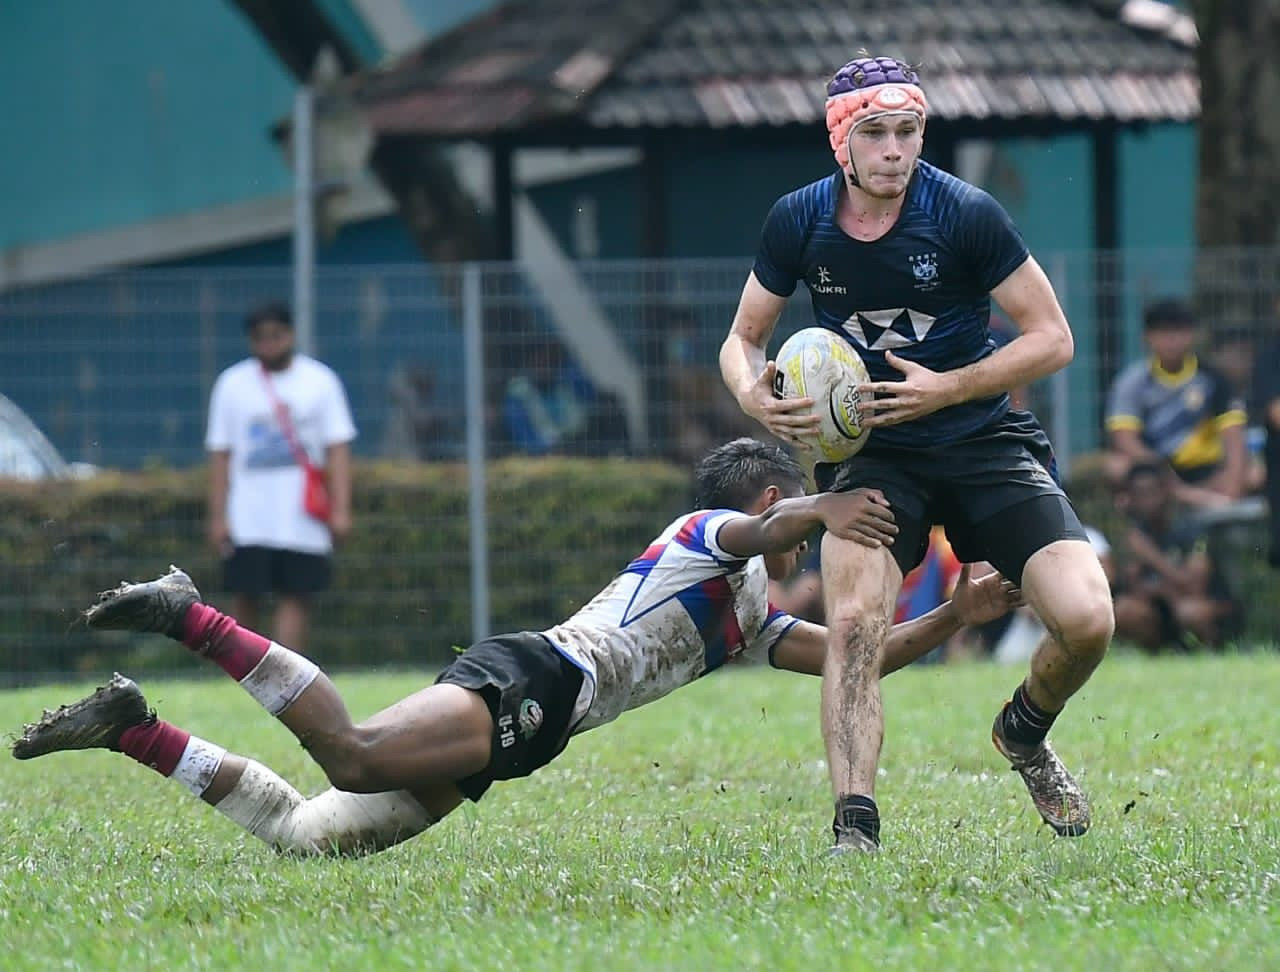 Blake Elliot slips a tackle at the Asia Rugby U19 Championships. Photo: Handout